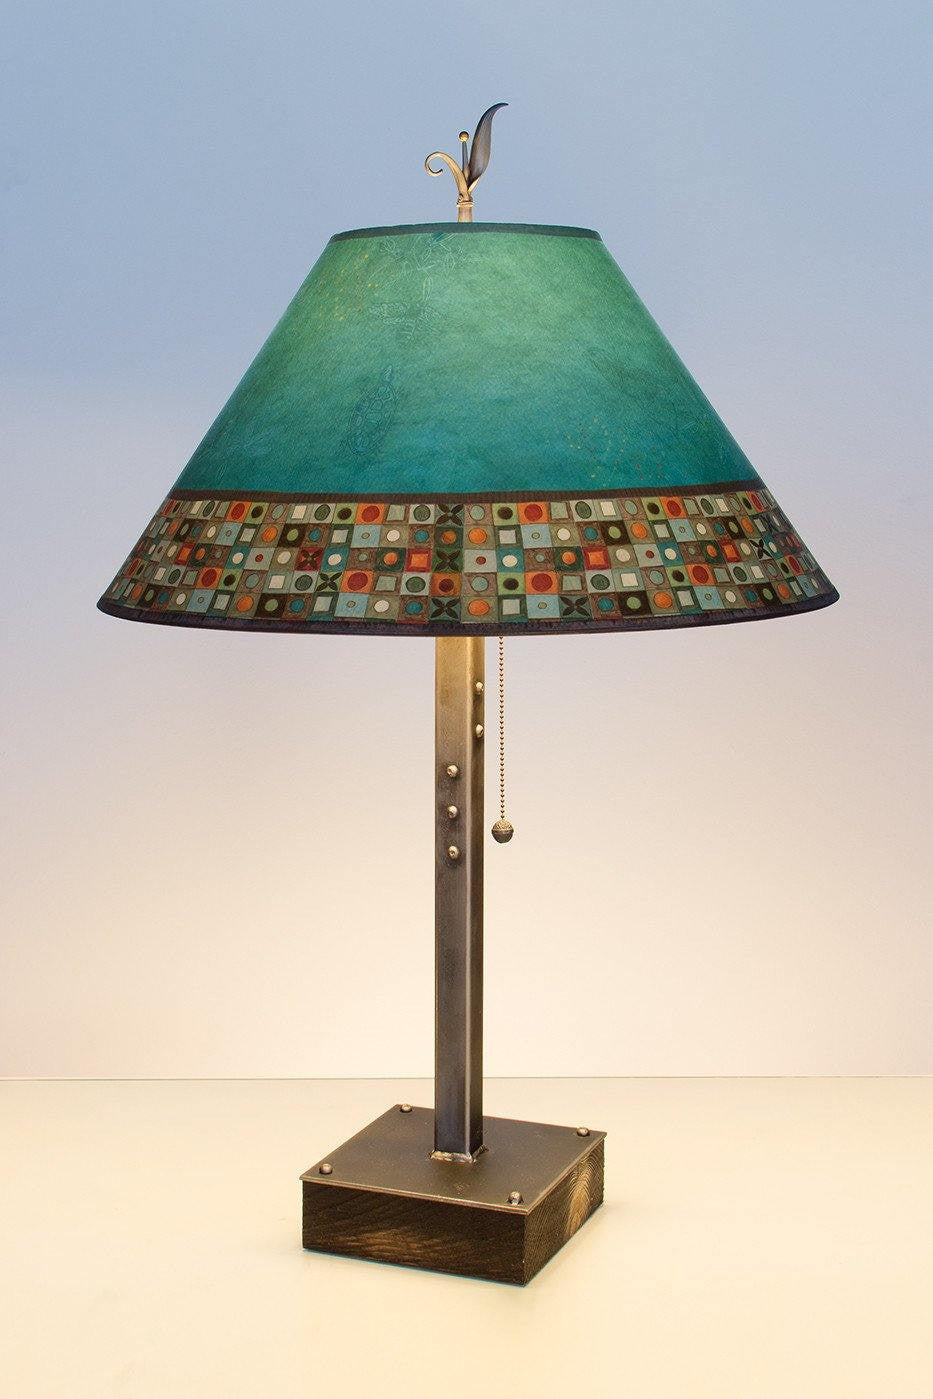 Janna Ugone & Co Table Lamps Steel Table Lamp on Wood with Large Conical Shade in Jade Mosaic